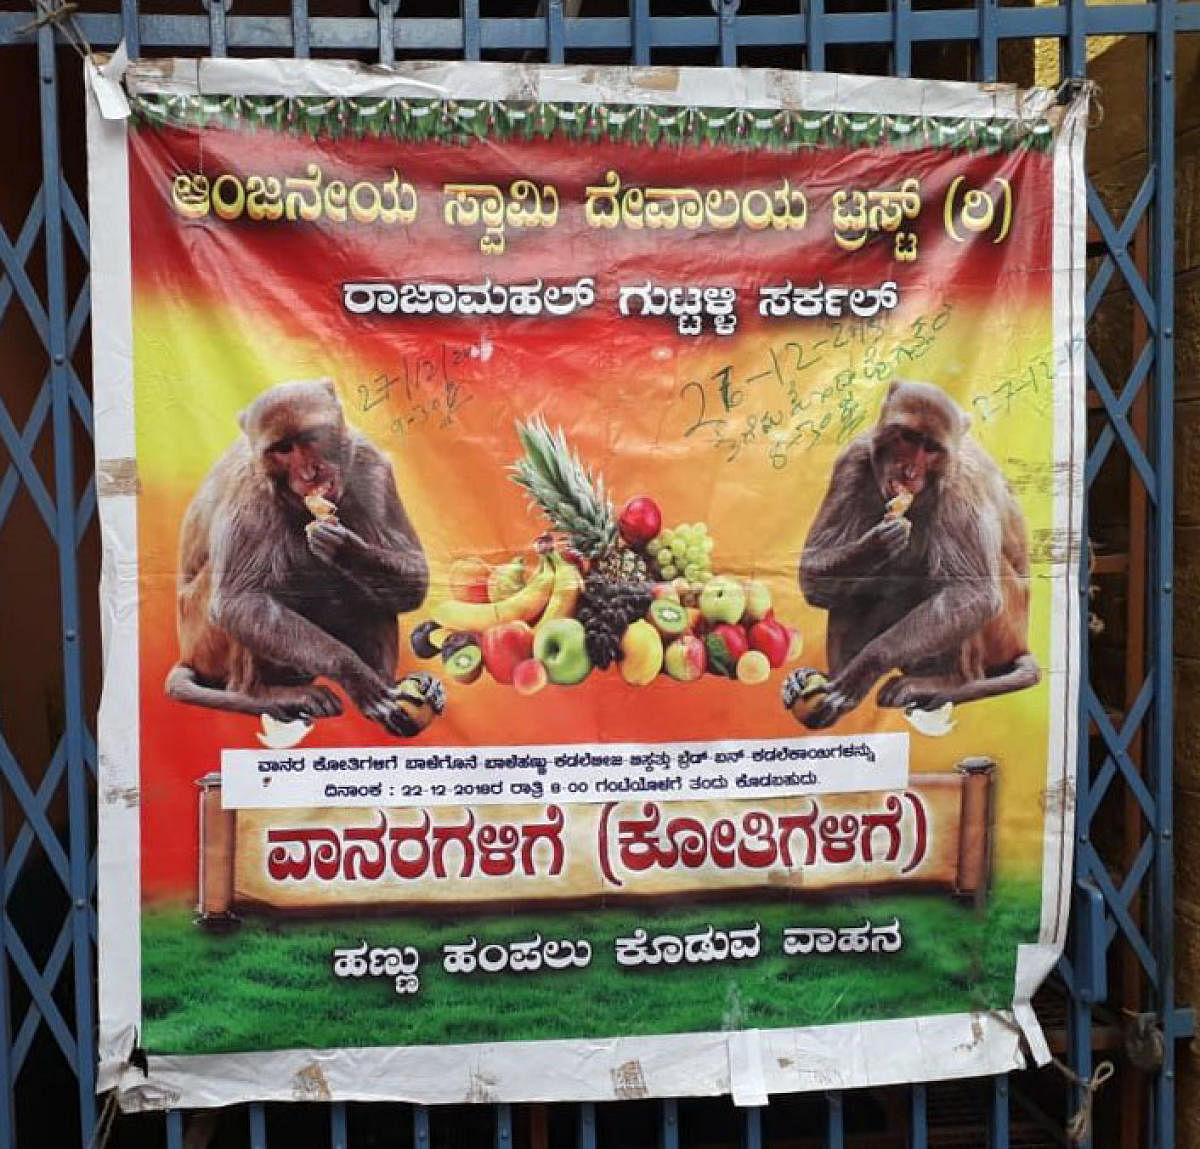 Conservationists, officials wary of monkey feeding